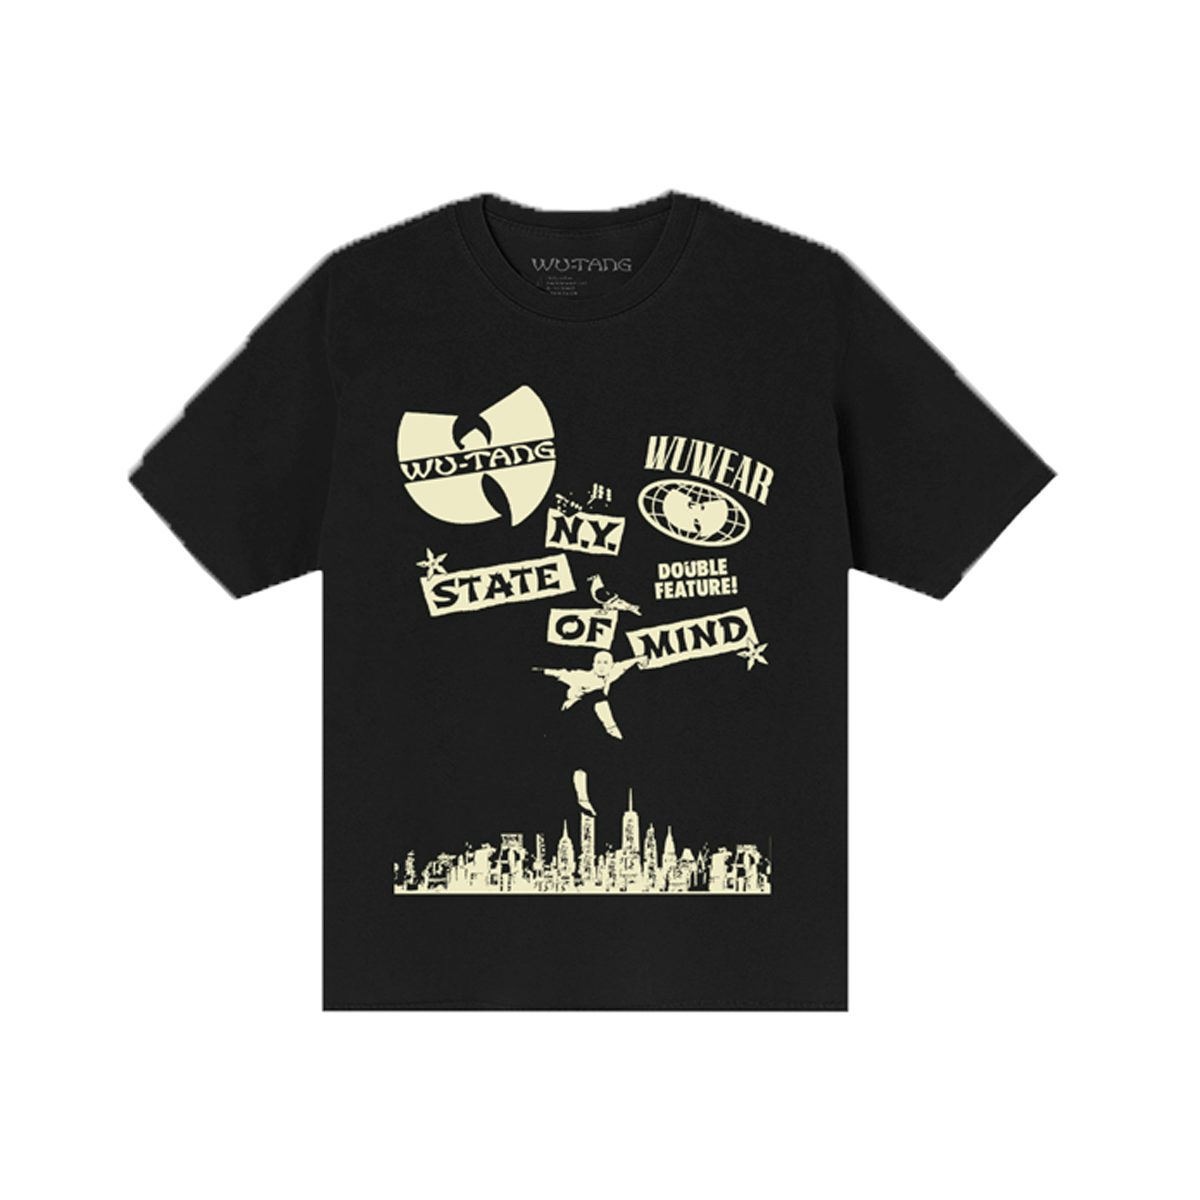 Wu-Tang Clan NY State of Mind Tour Tee